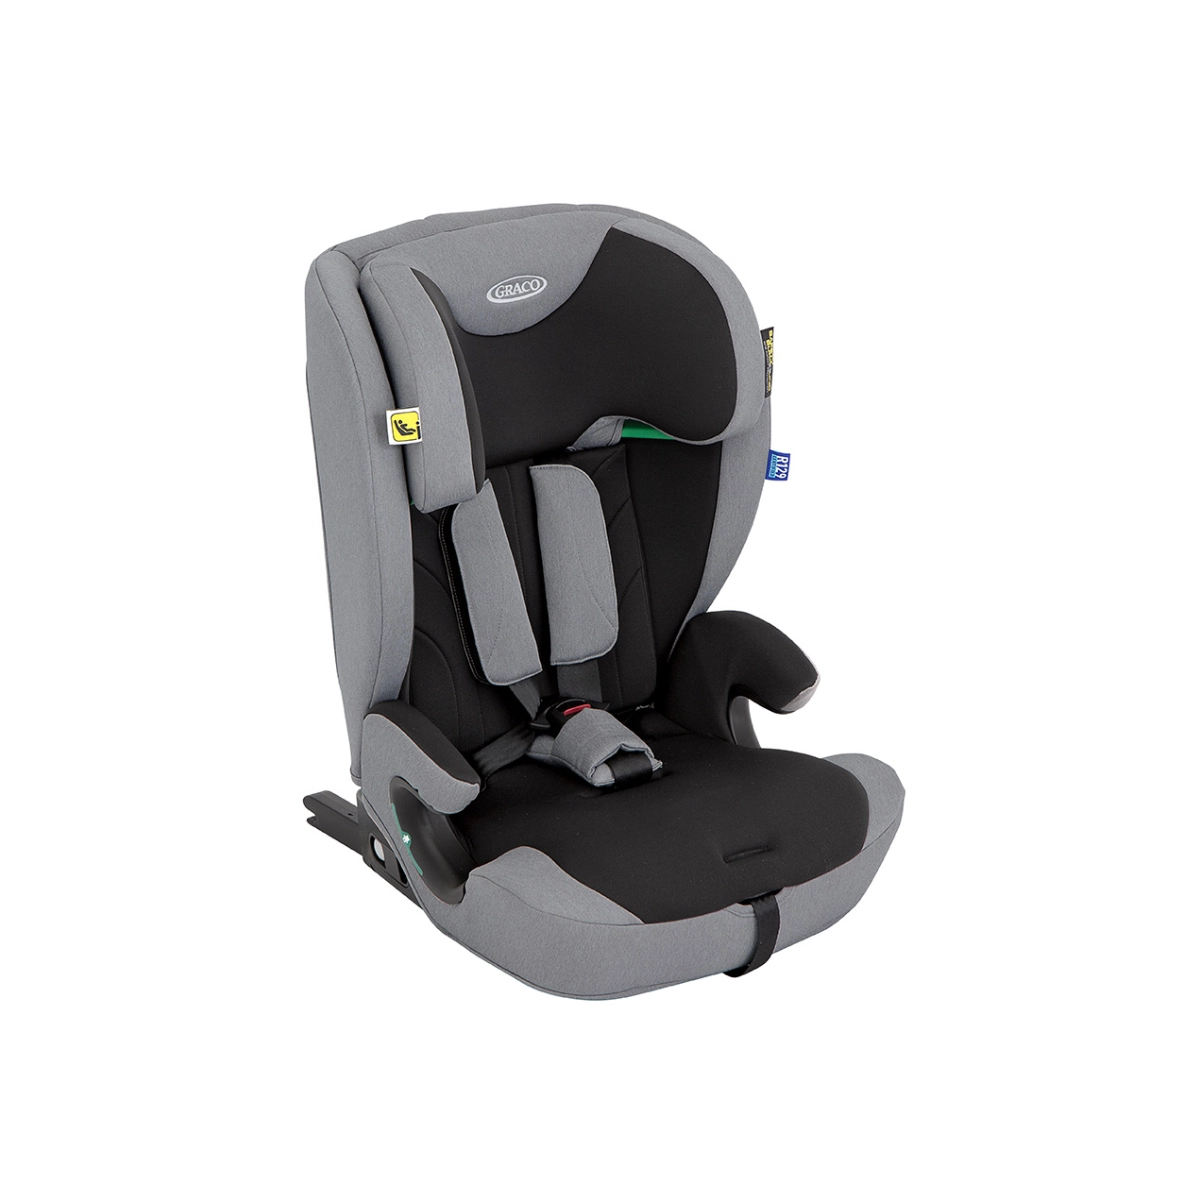 Graco Energi i-Size R129 2-in-1 Harness Booster Car Seat